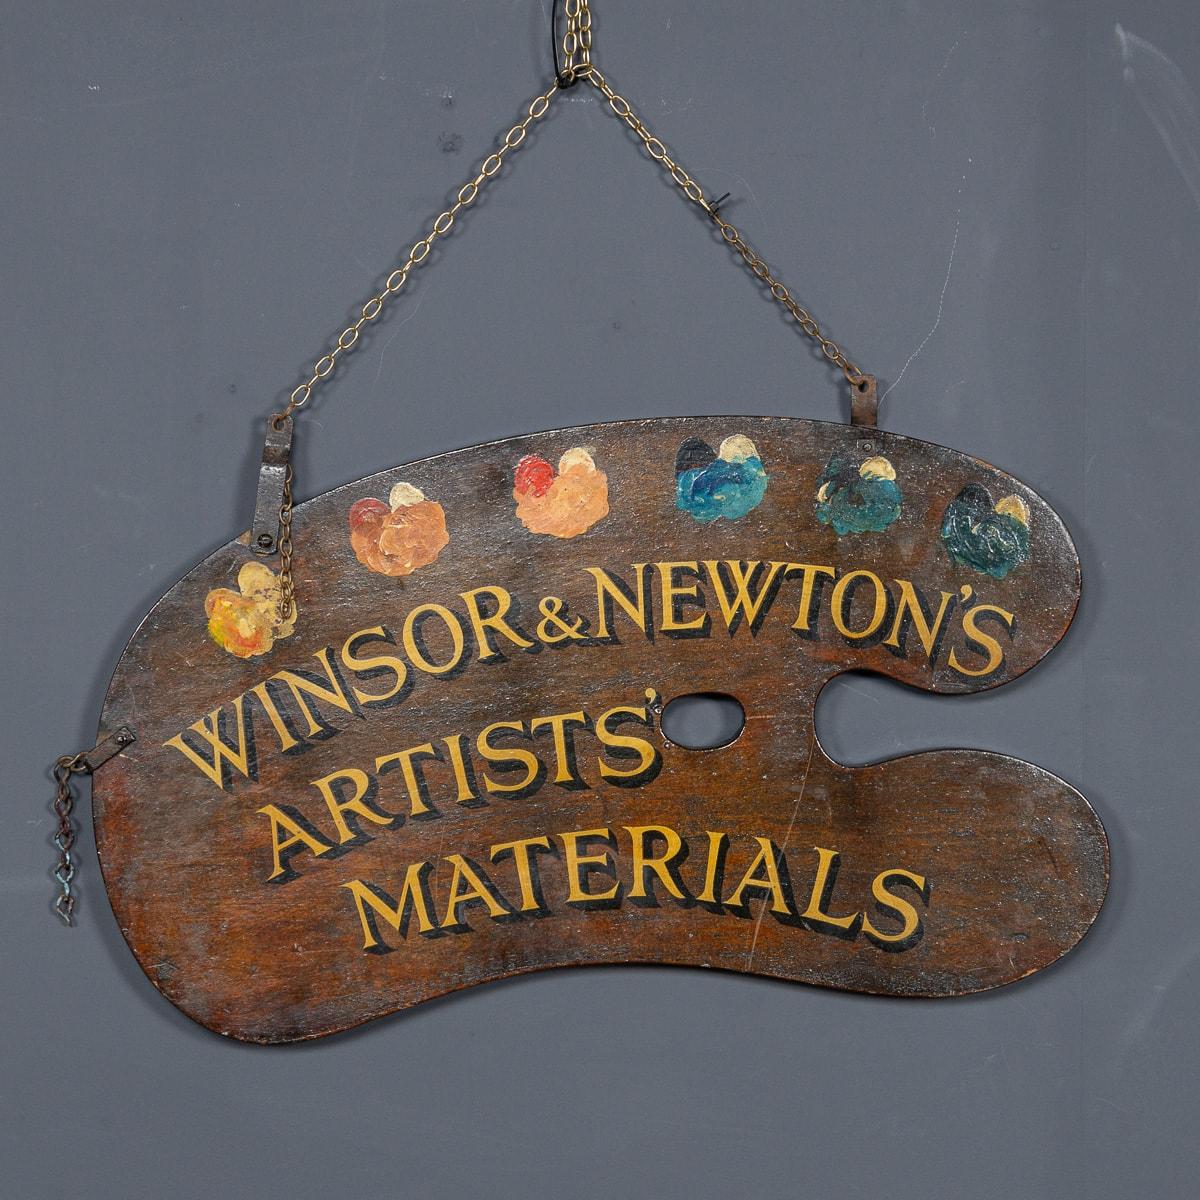 Antique early-20th Century advertising sign for the art suppliers Winsor & Newton. Designed in the shape of an artists paint palette with a selection of coloured paints and golden text 